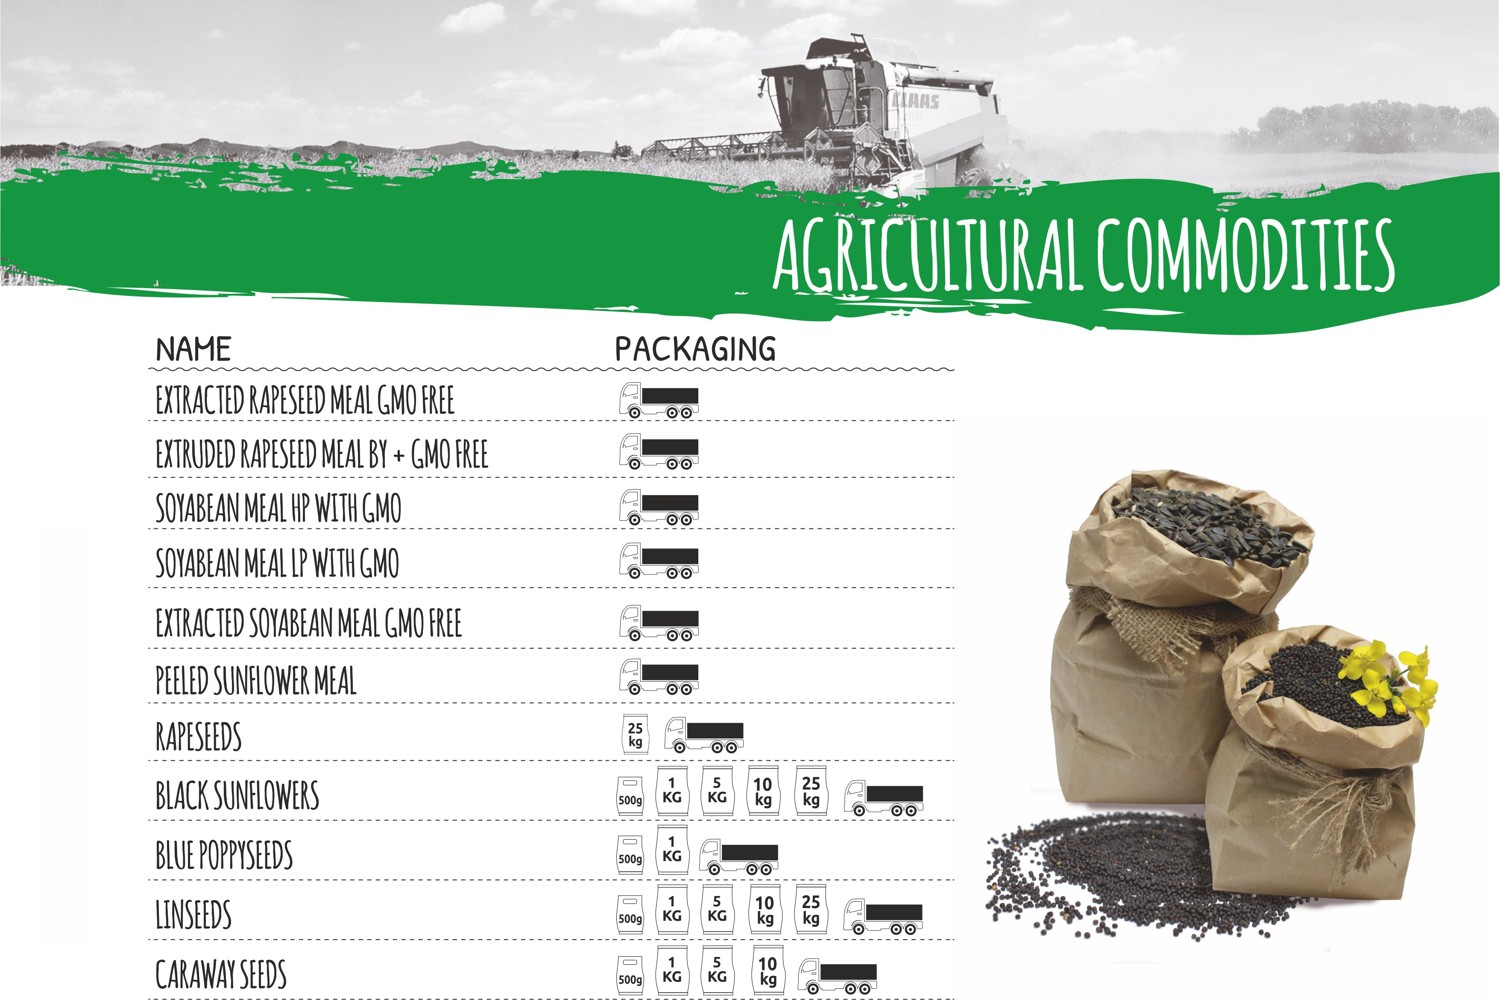 Agricultural commodities